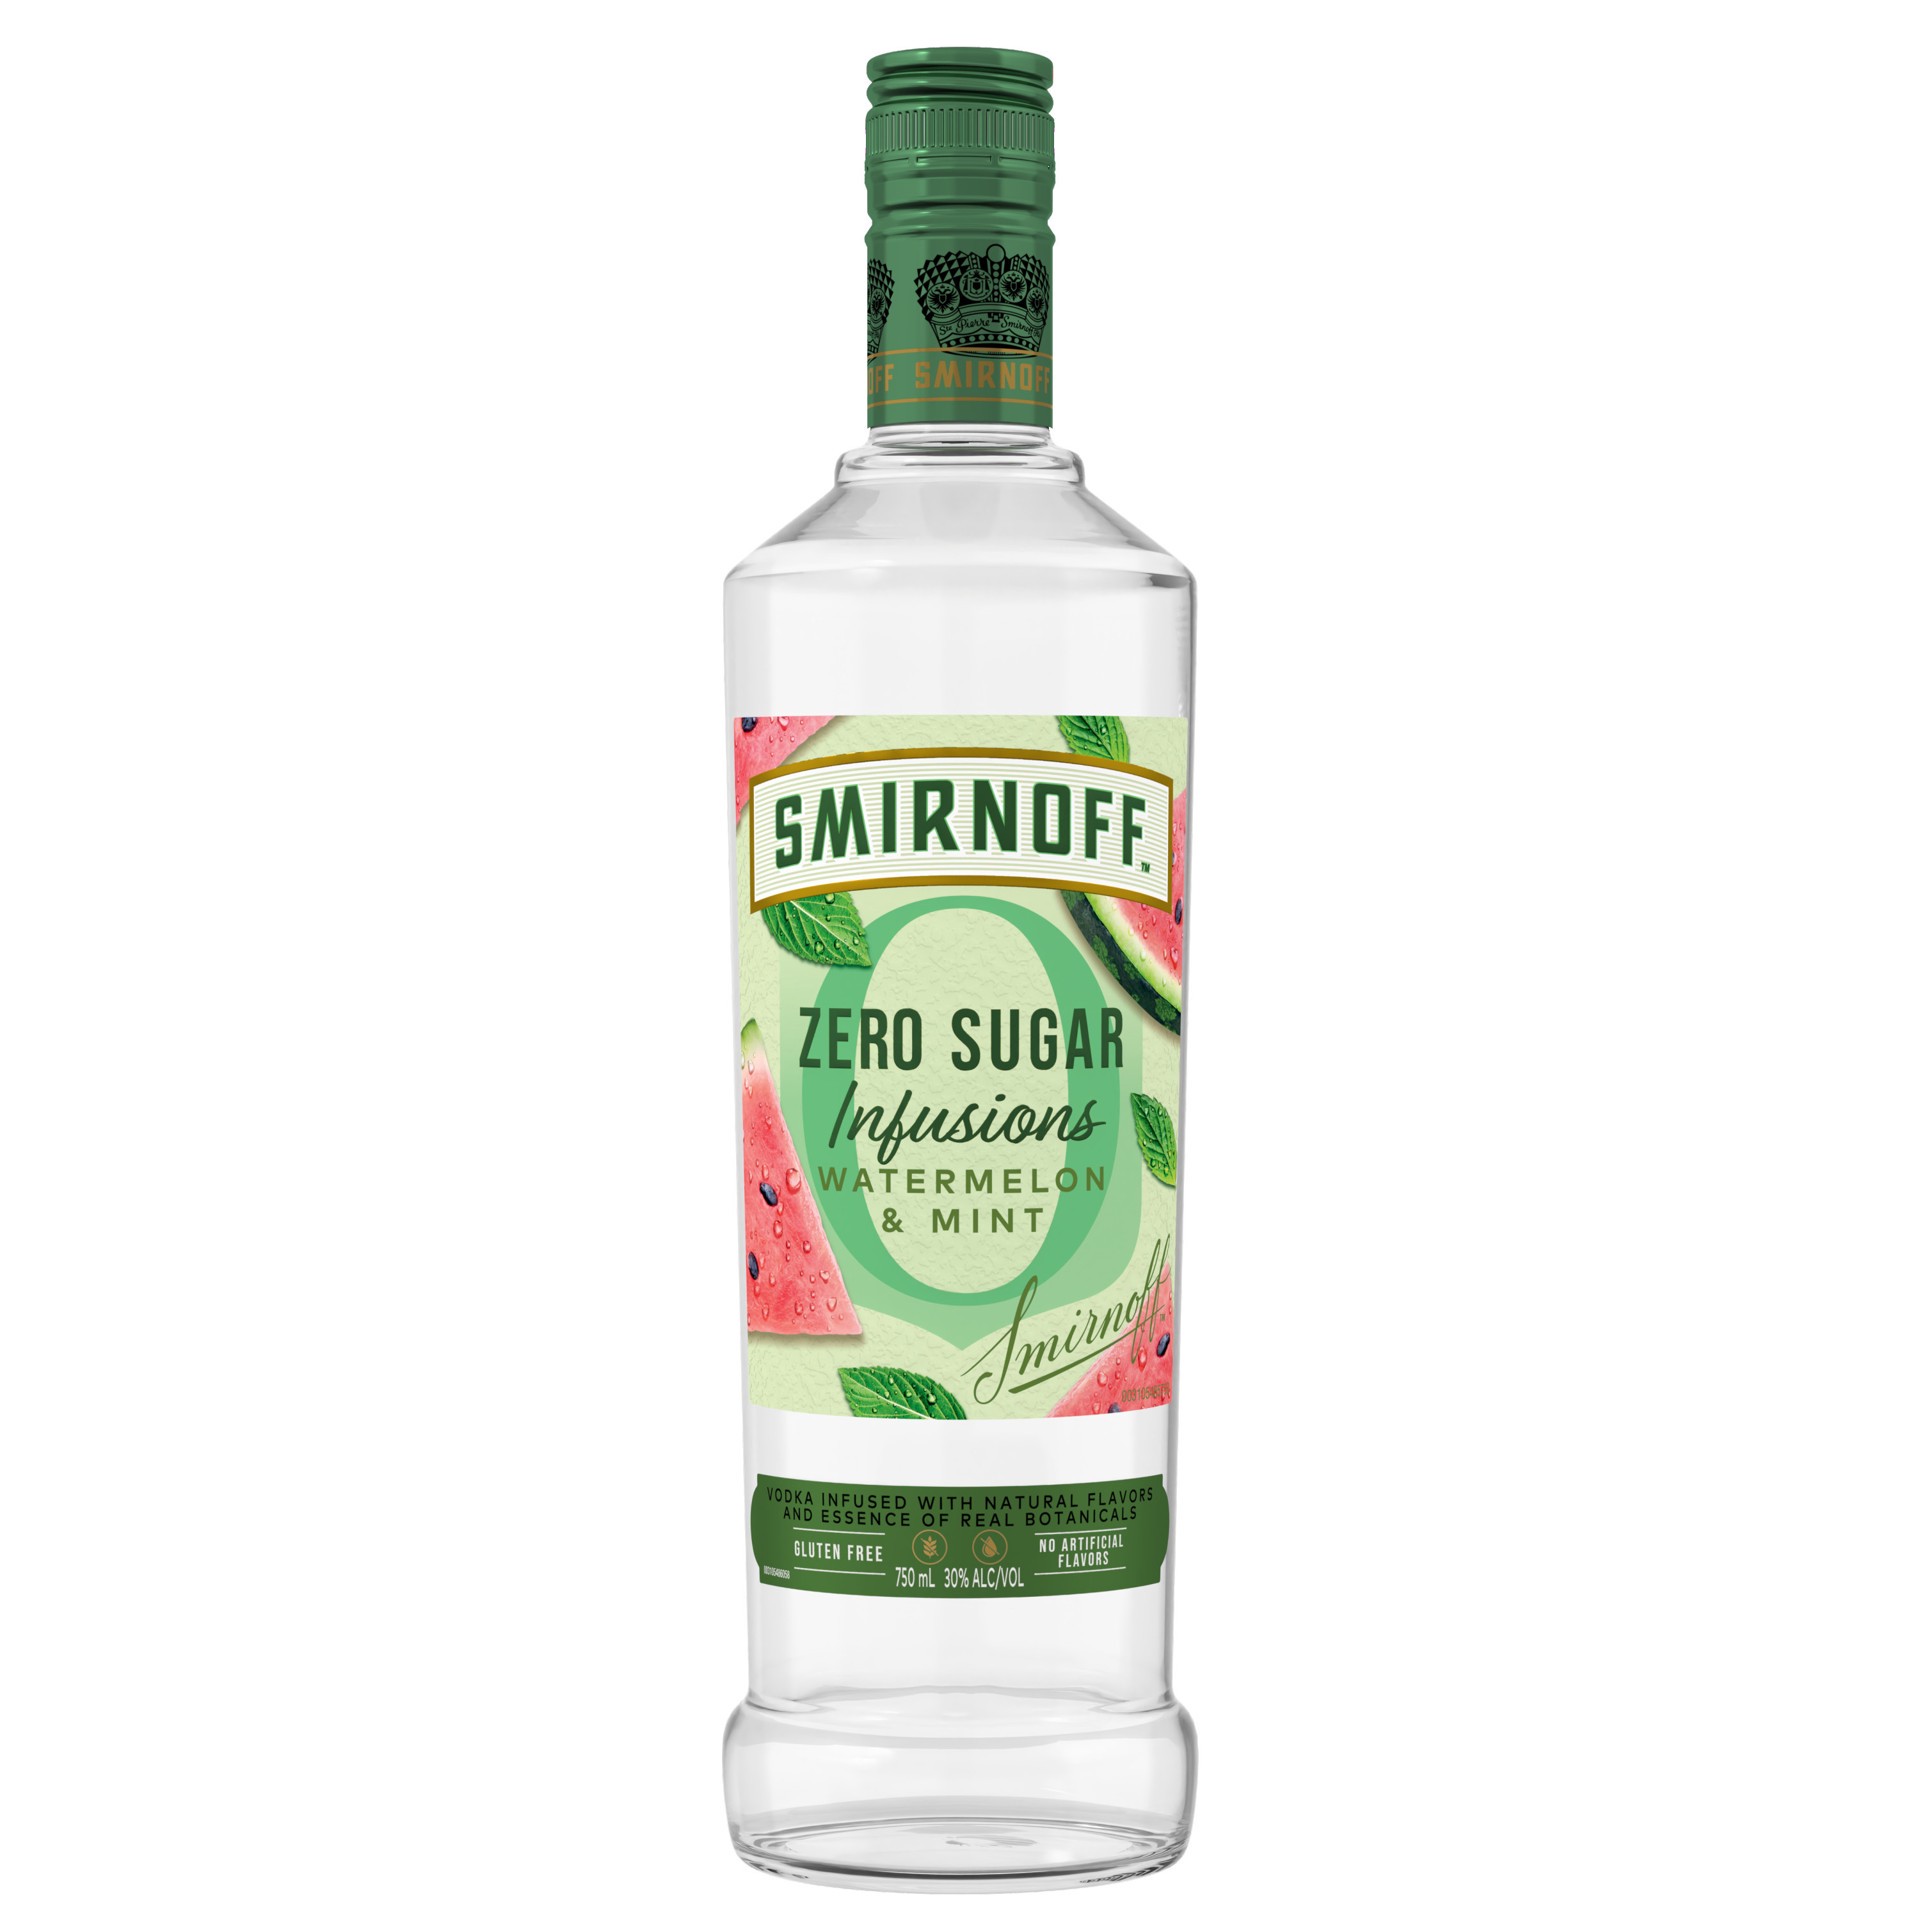 slide 1 of 21, Smirnoff Zero Sugar Infusions Watermelon & Mint (Vodka Infused with Natural Flavors & Essence of Real Botanicals), 750 mL, 750 ml